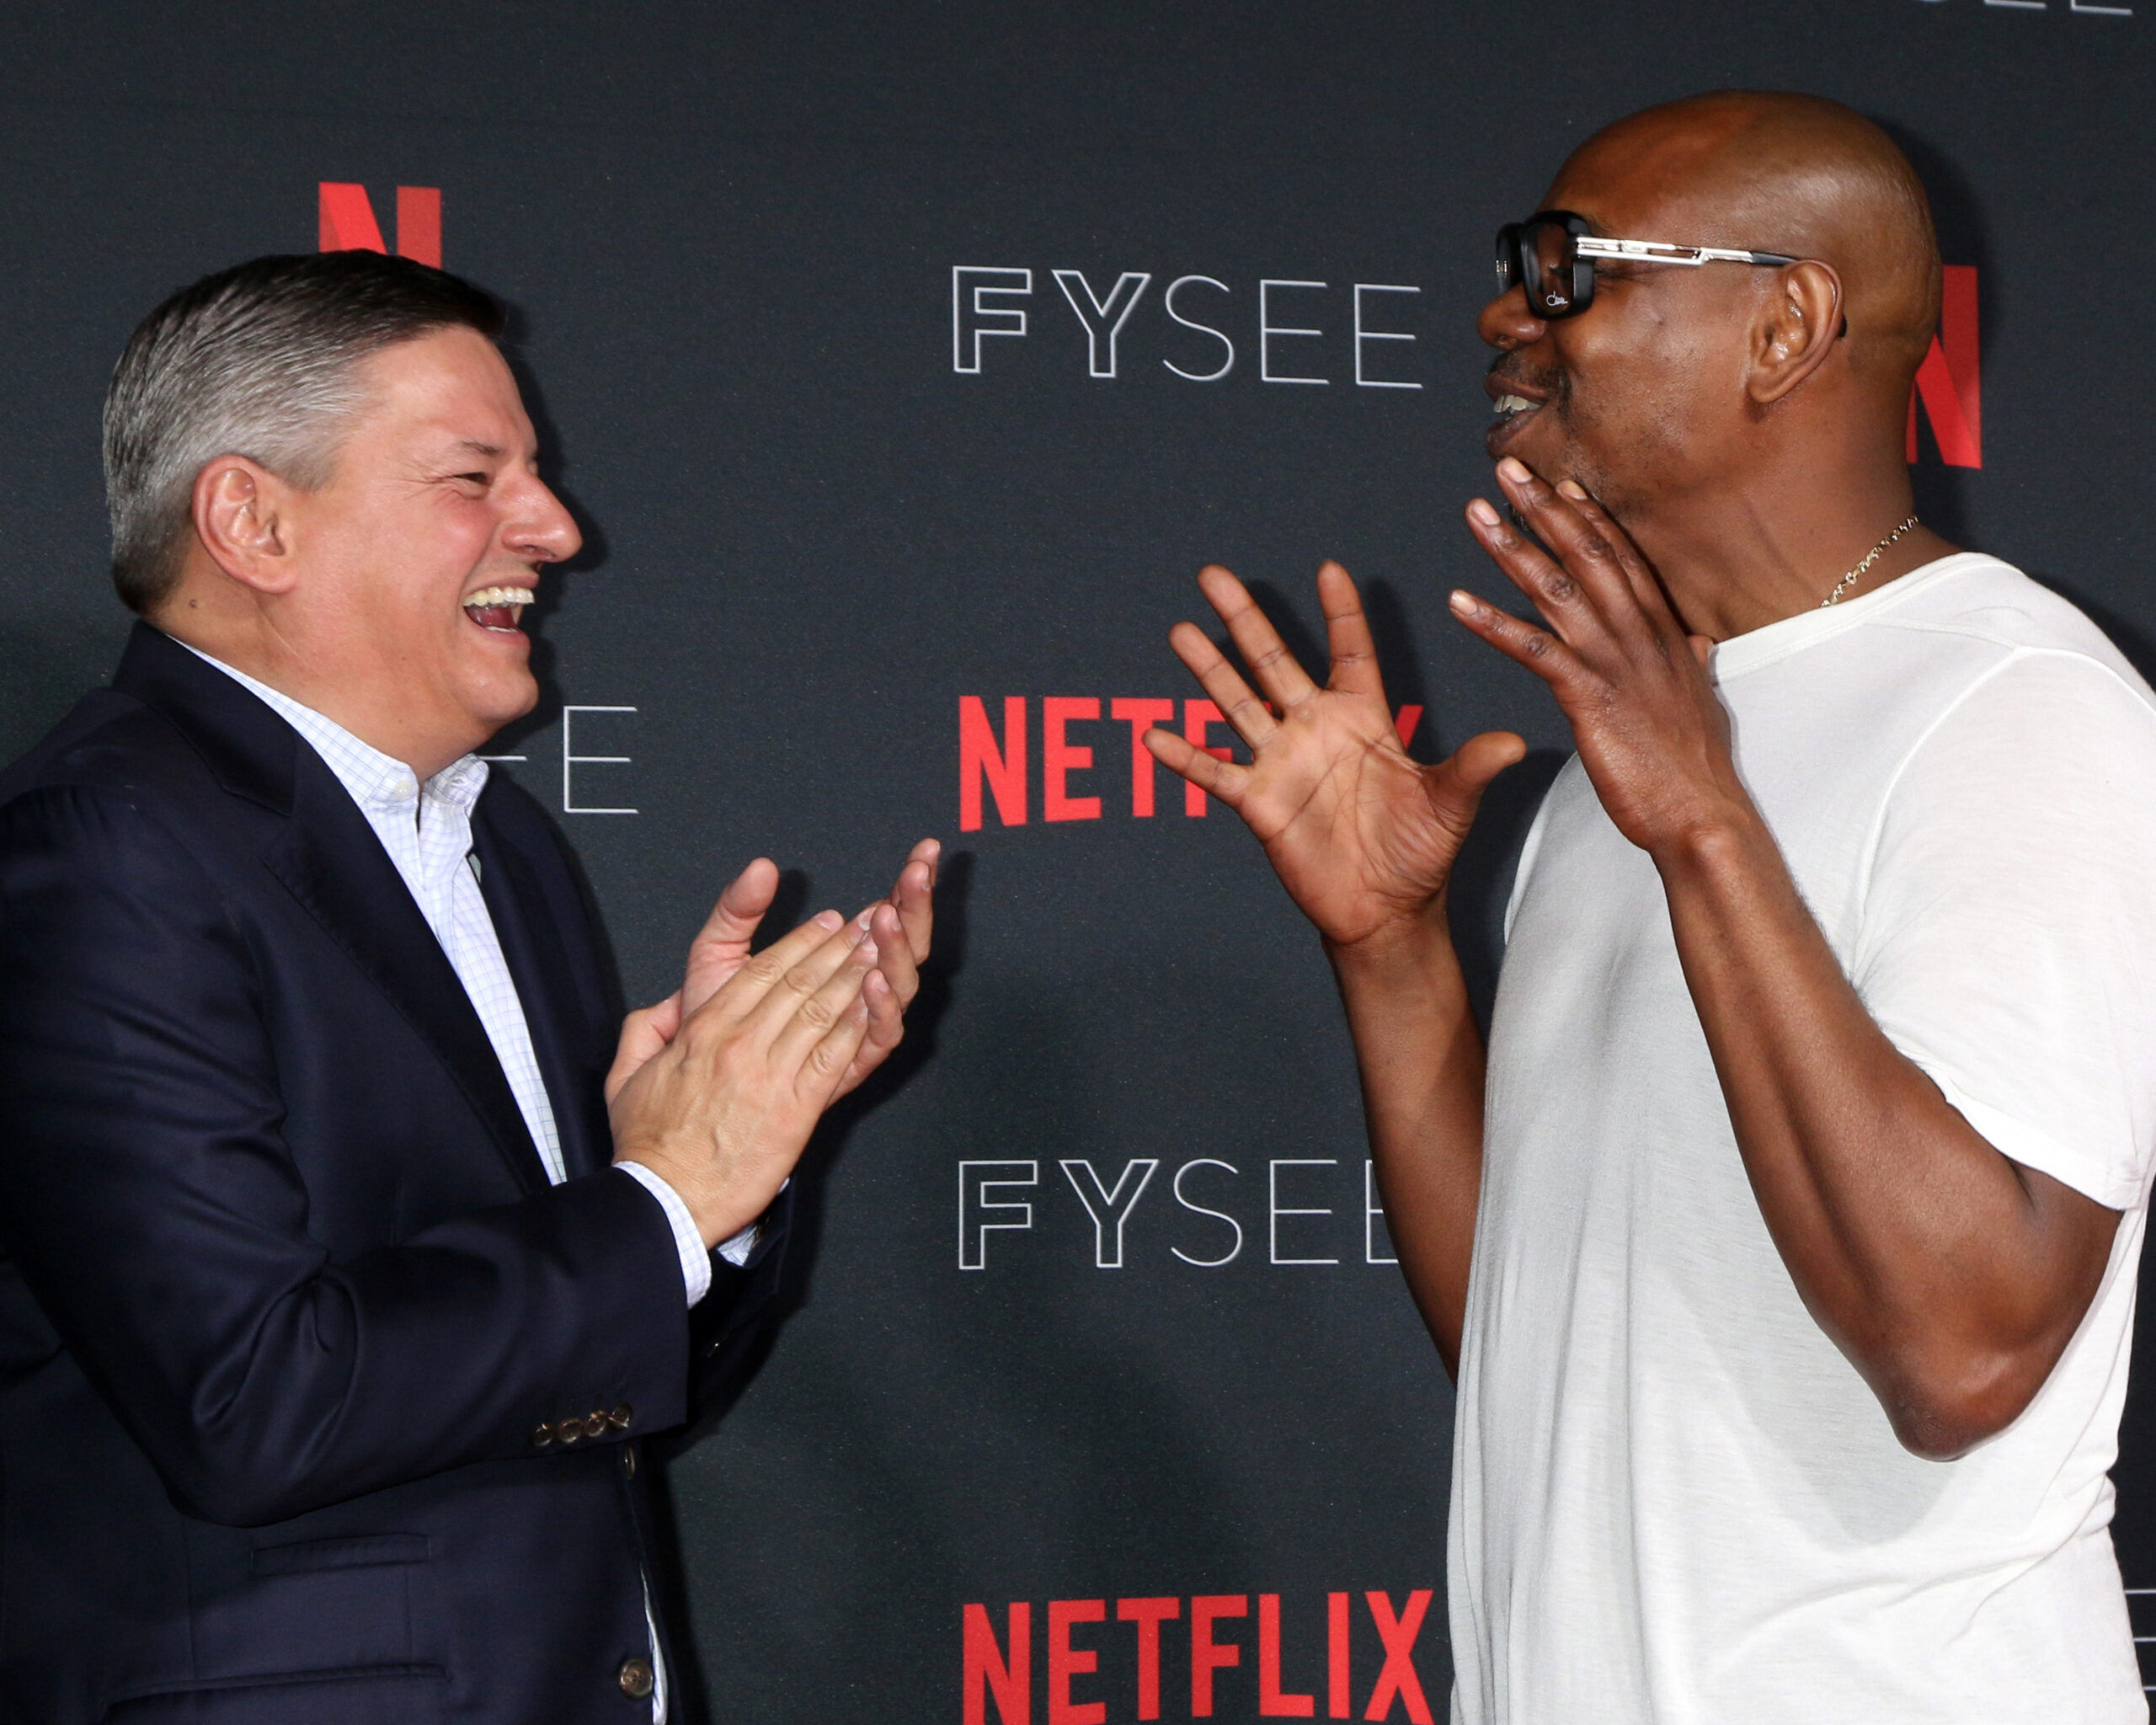 Netflix co-CEO Ted Sarandos with Dave Chappelle at the Netflix FYSEE Kick-Off Event at Raleigh Studios on May 6, 2018 in Los Angeles, California